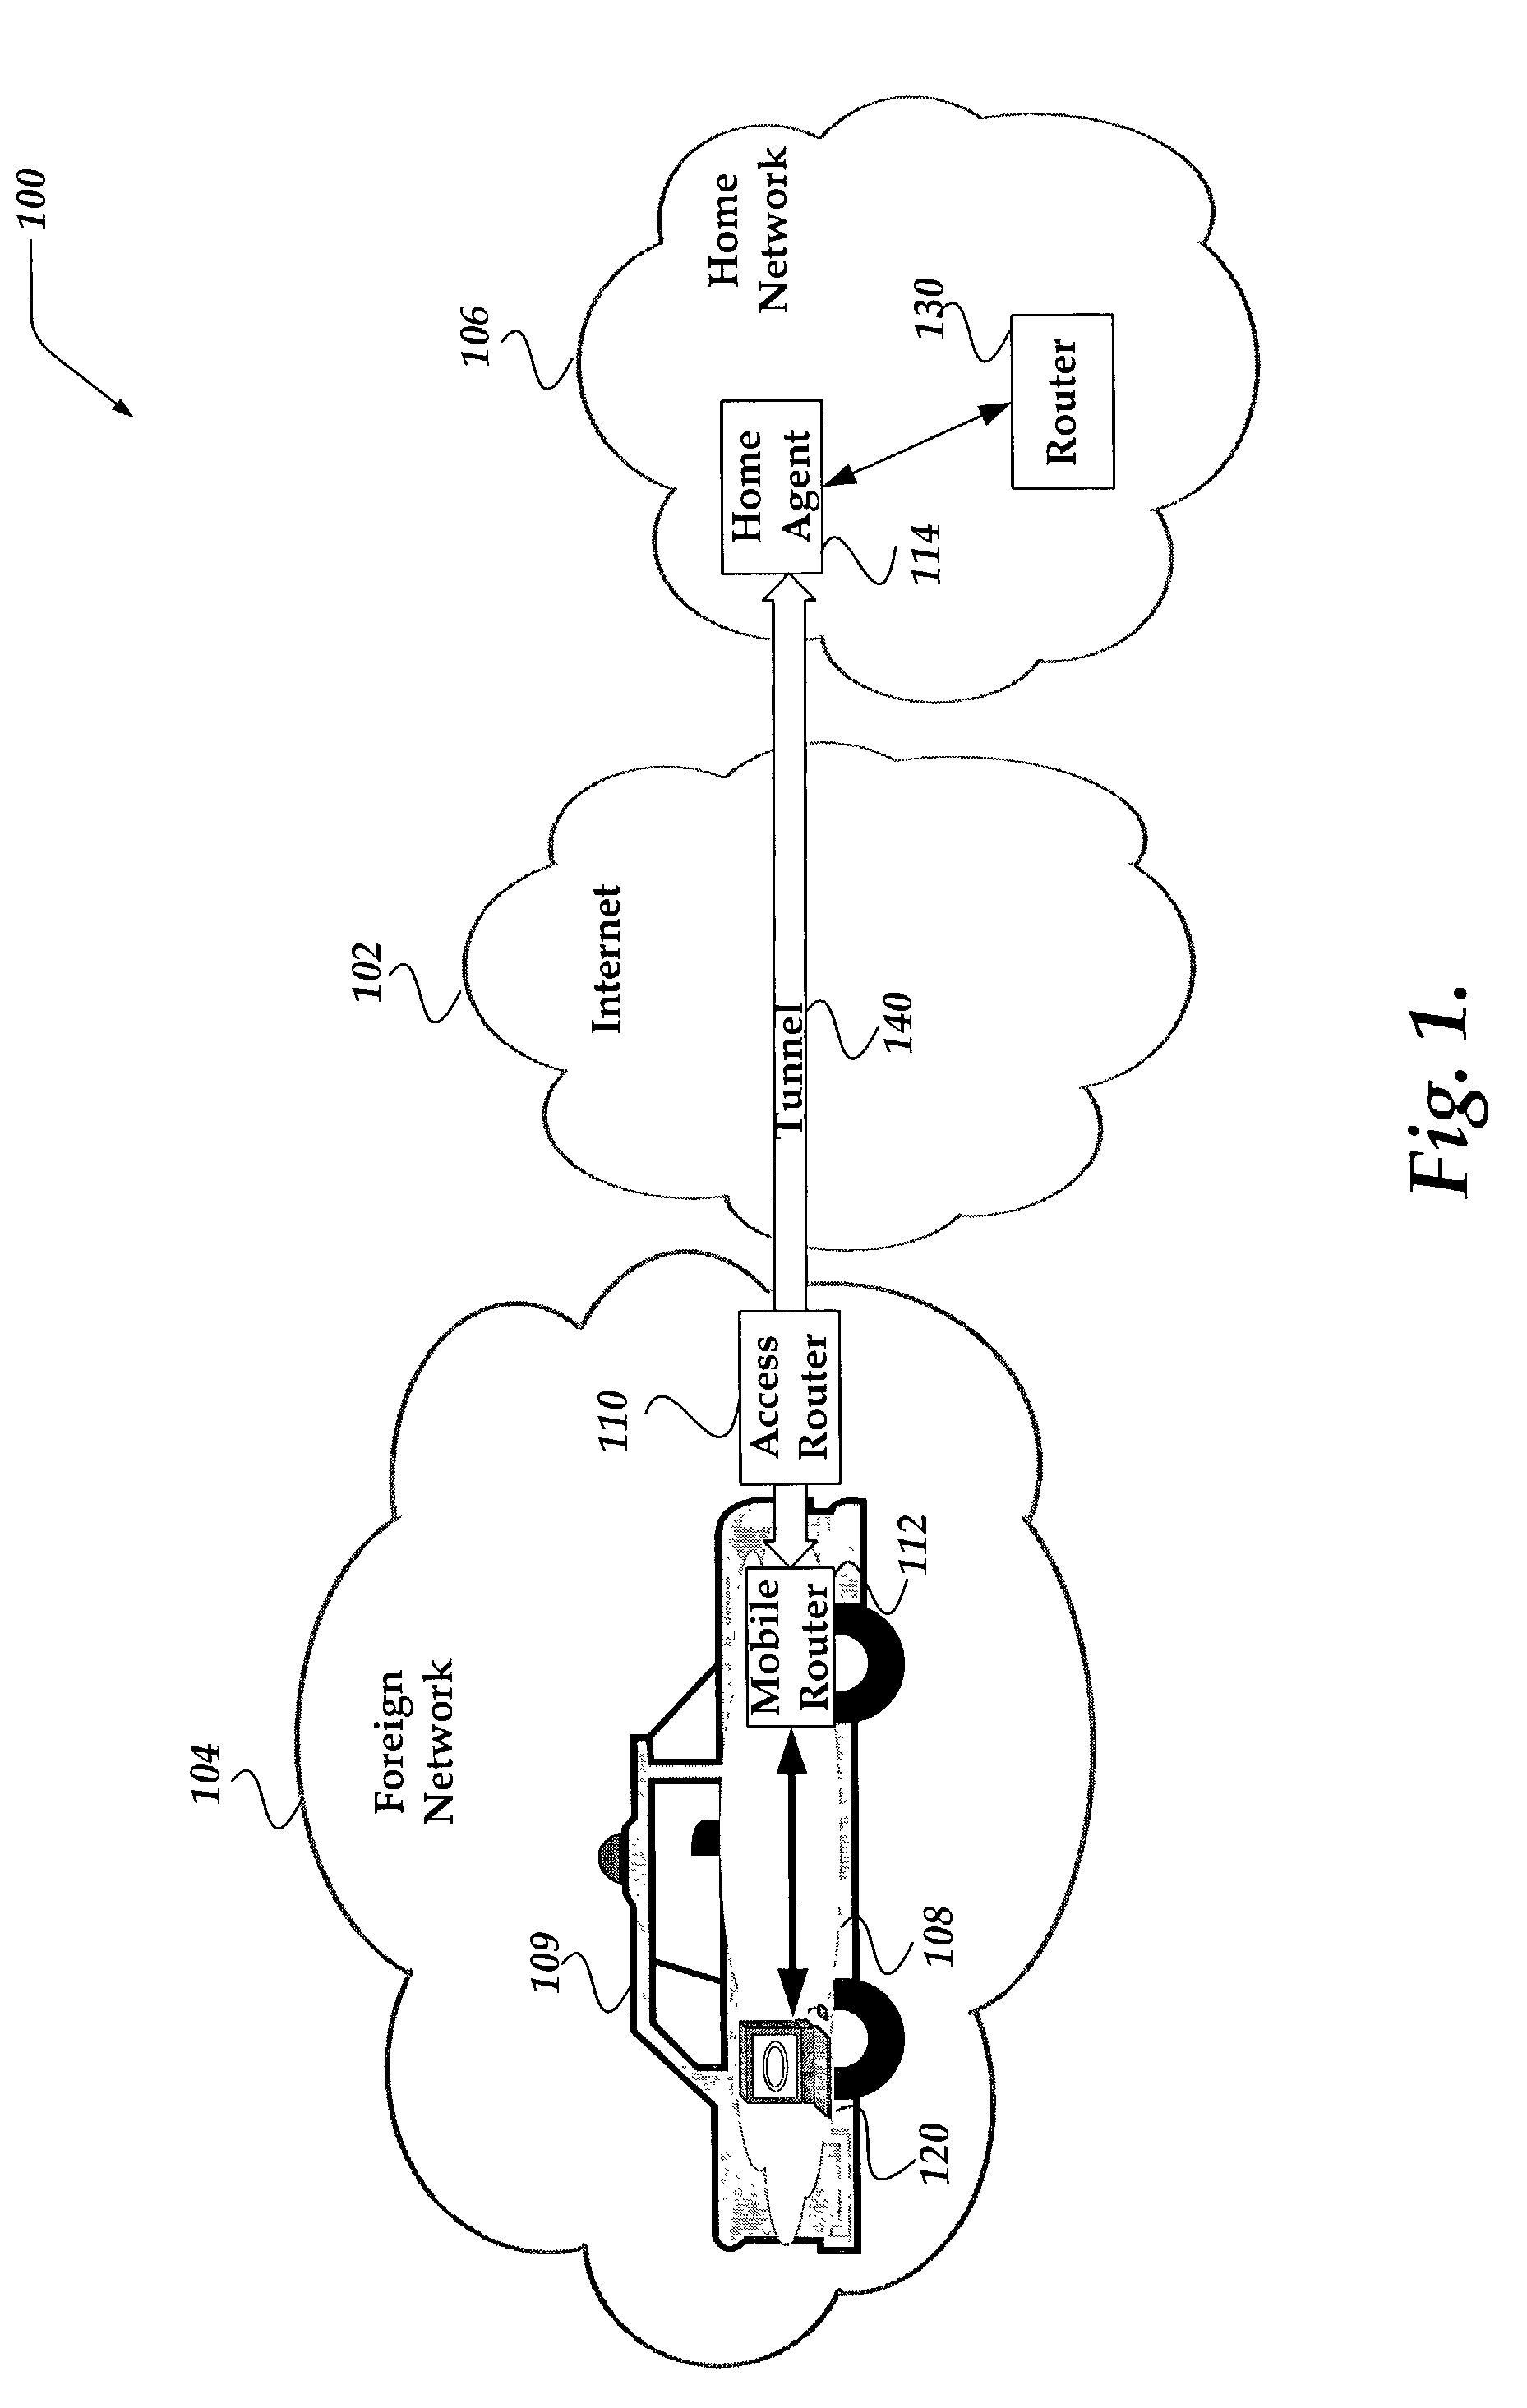 System and method for mobile router cost metric updates for routing protocols